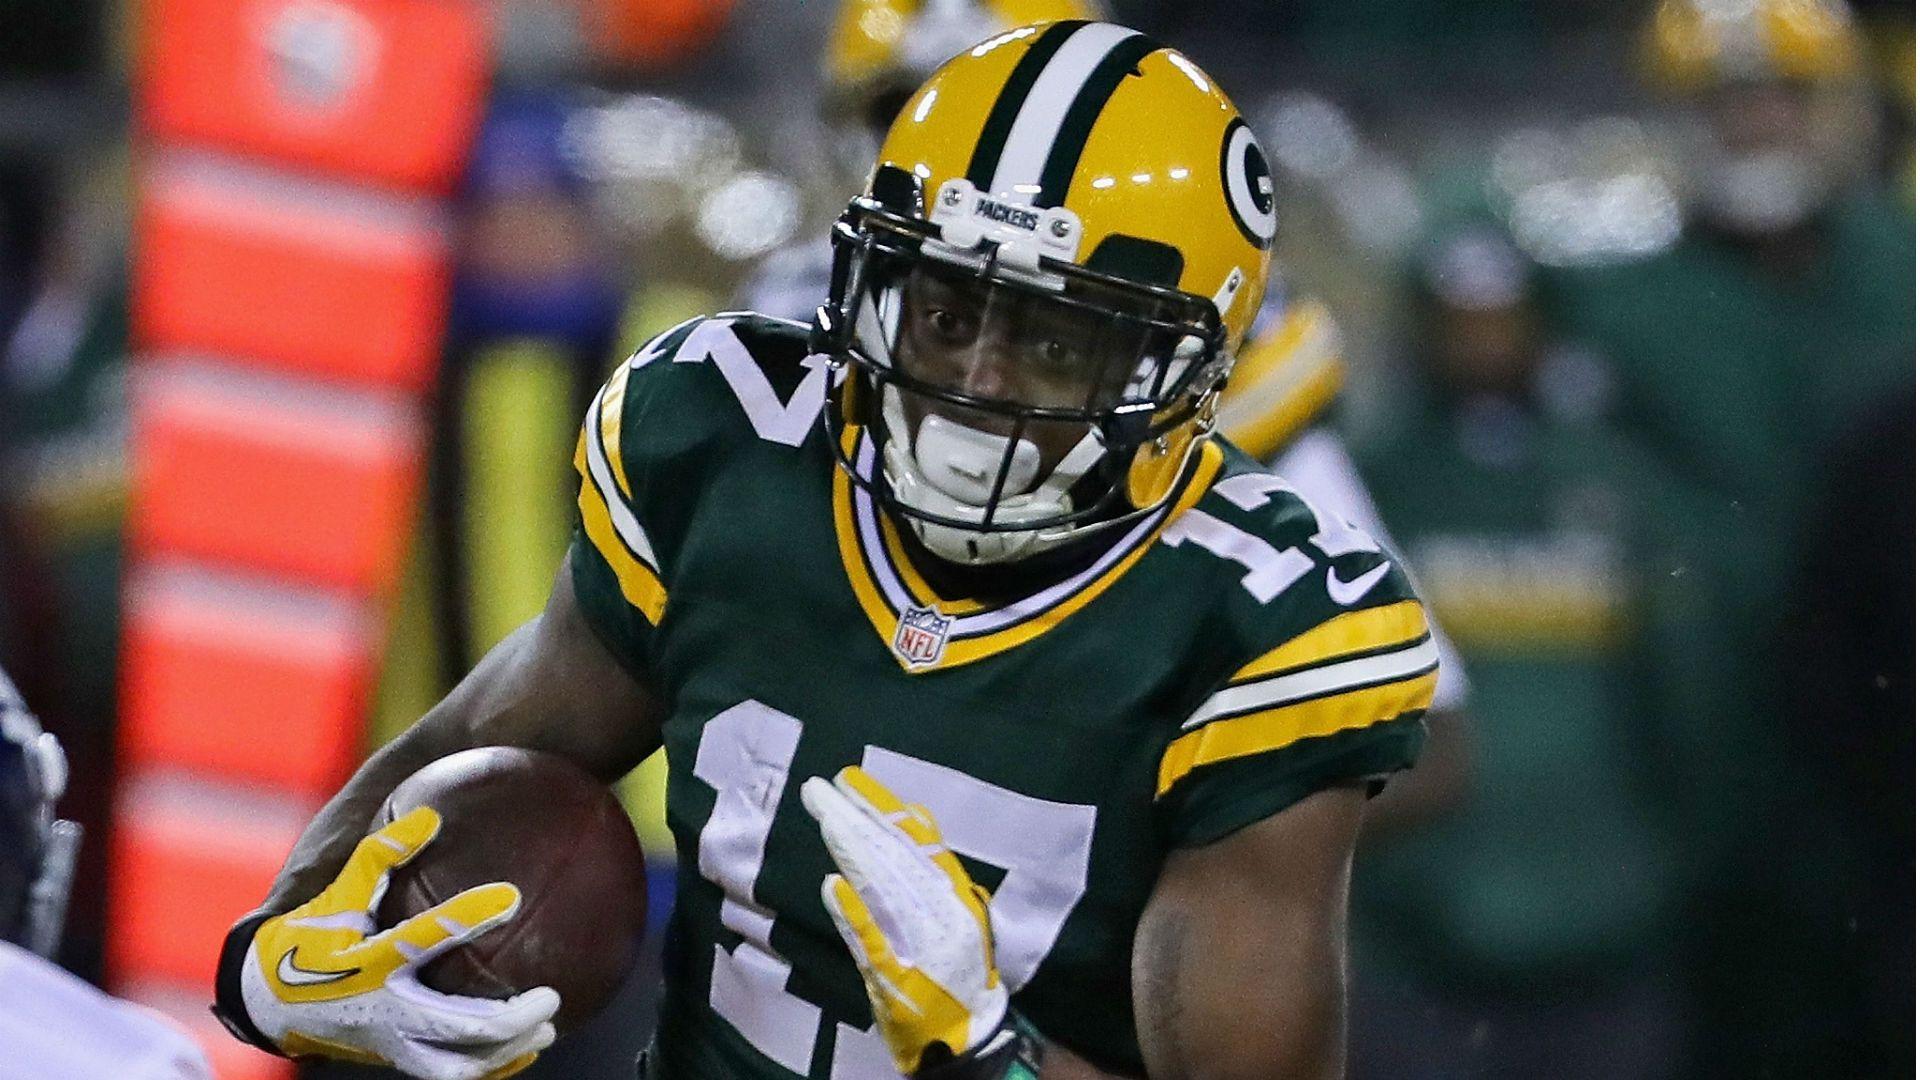 Jordy Nelson isn't the only injured WR Packers need to worry about